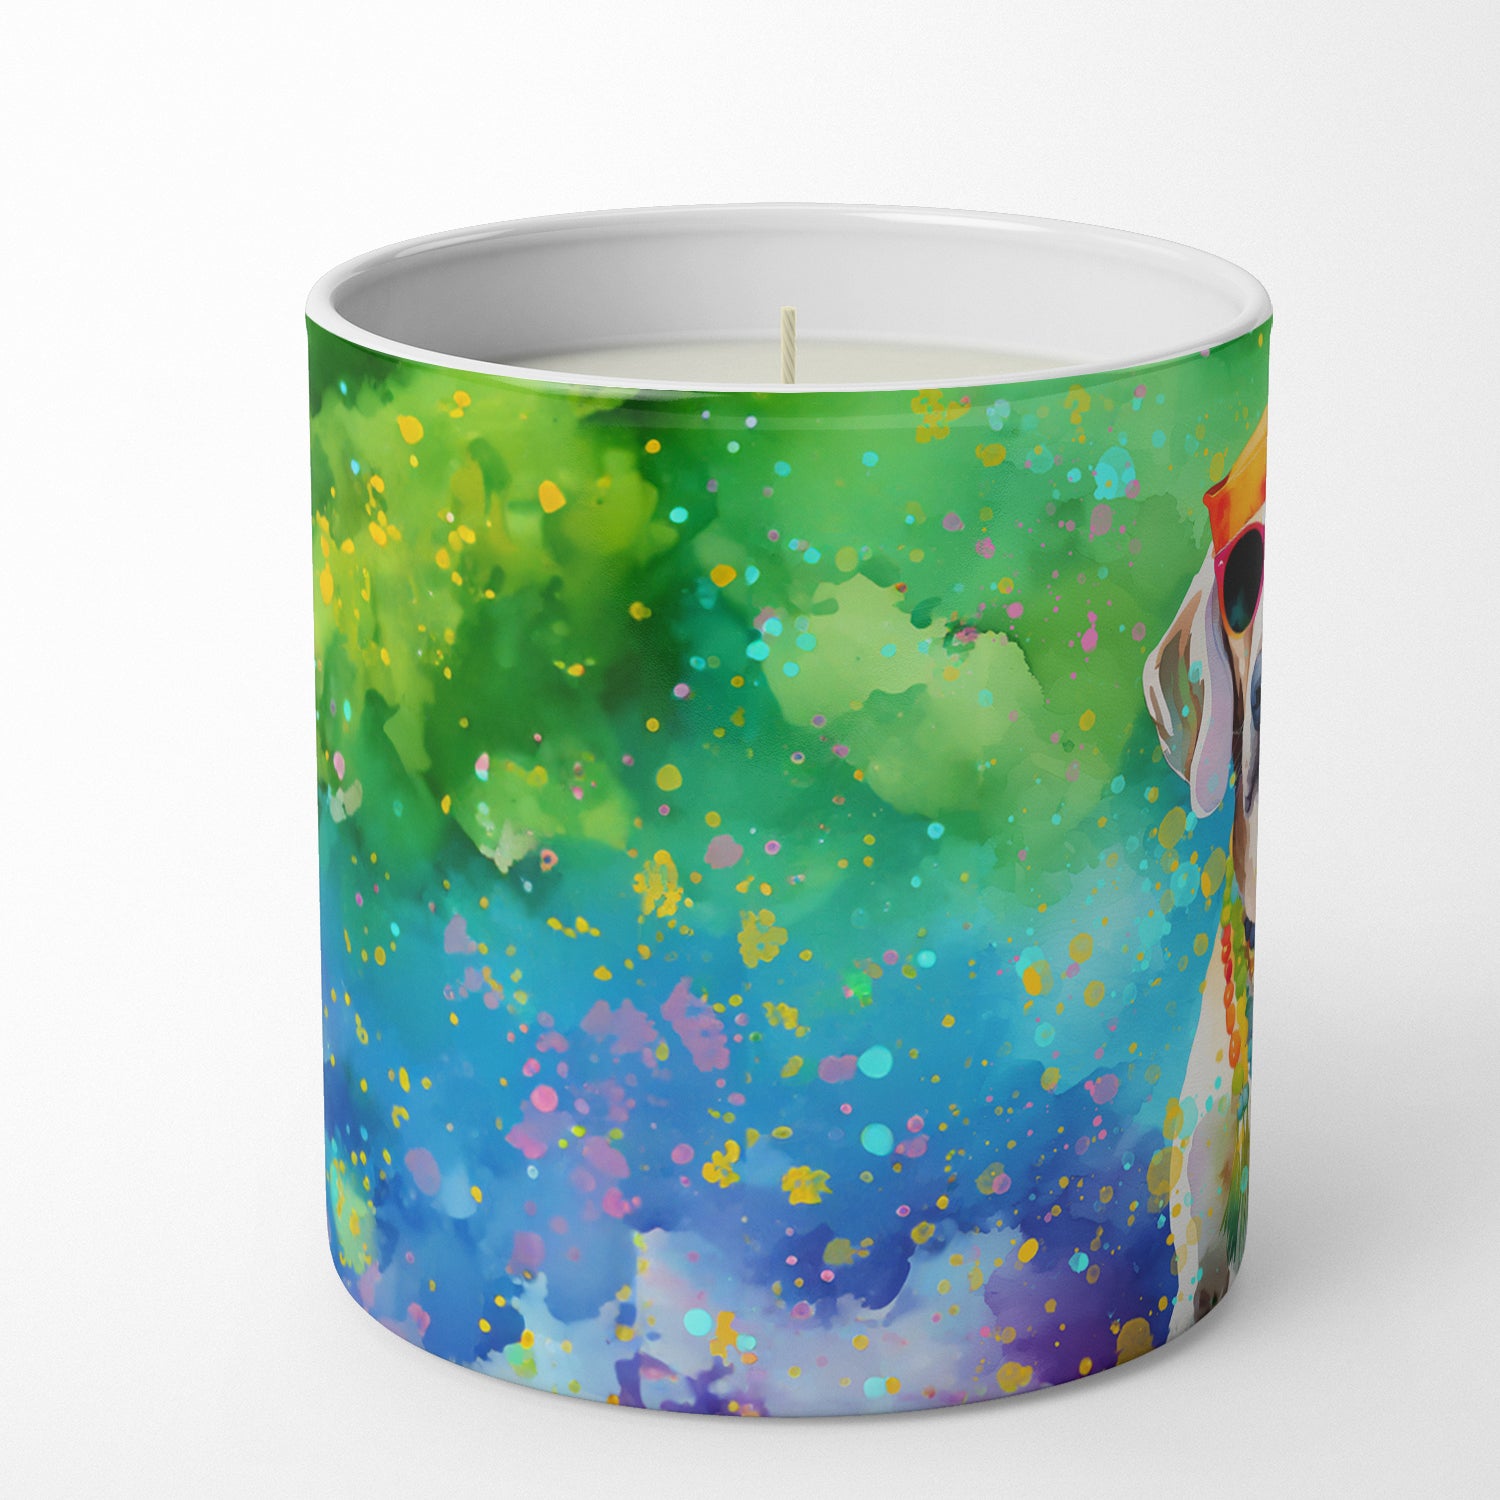 Weimaraner Hippie Dawg Decorative Soy Candle